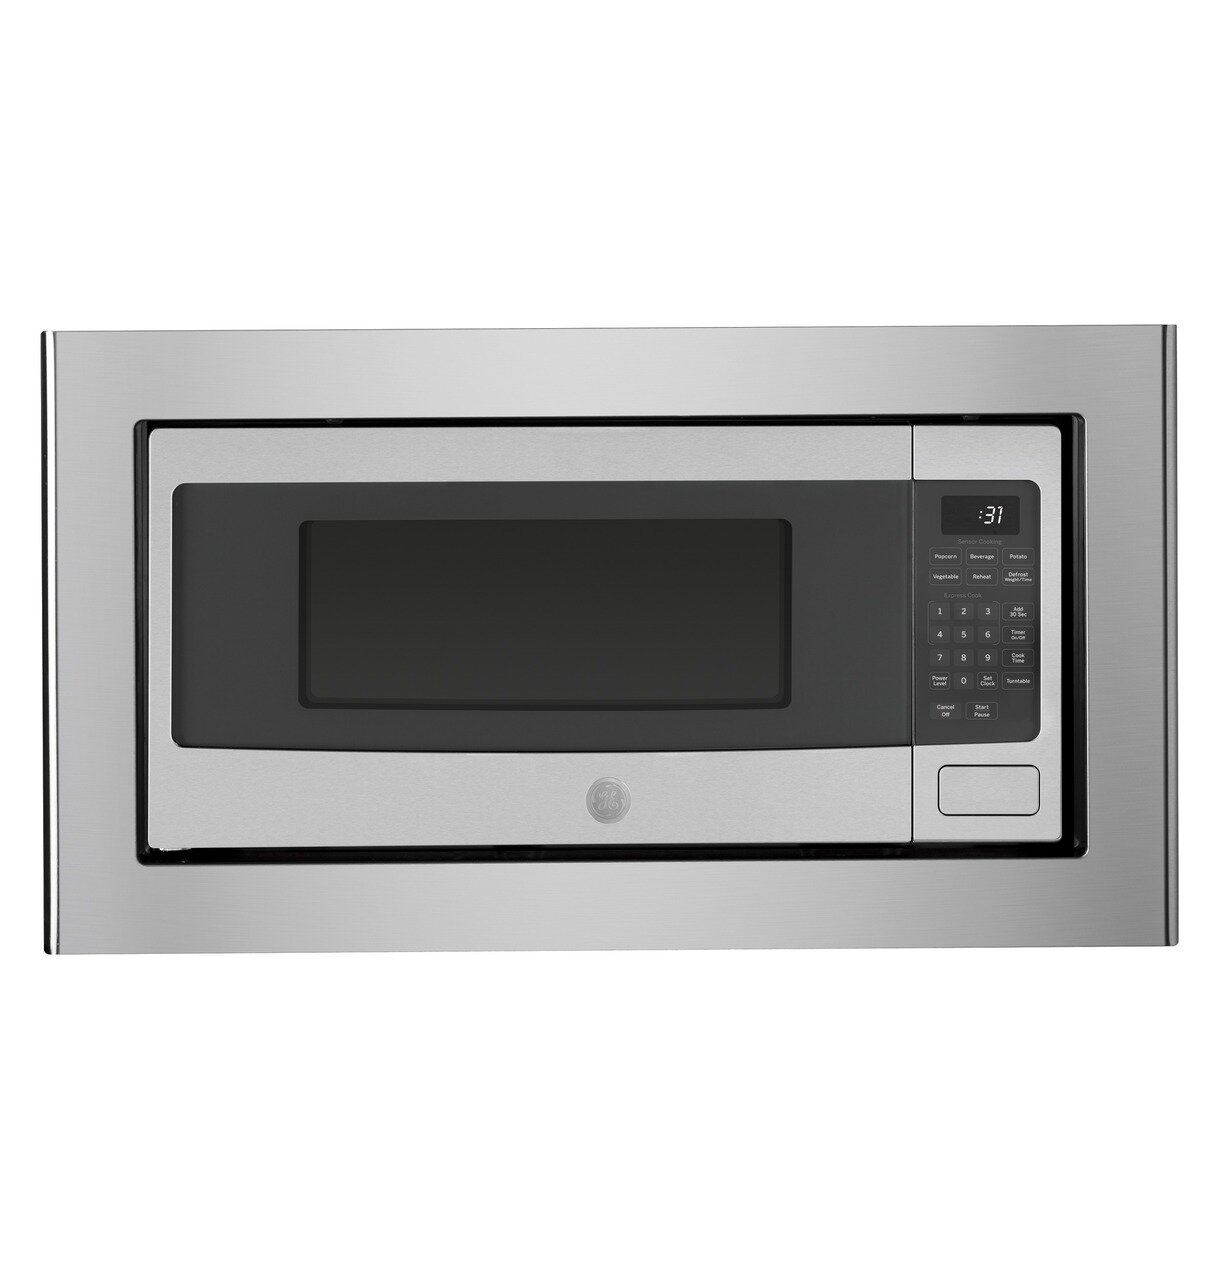 GE 1.2 cu. ft. Low Profile Over the Range Microwave in Stainless